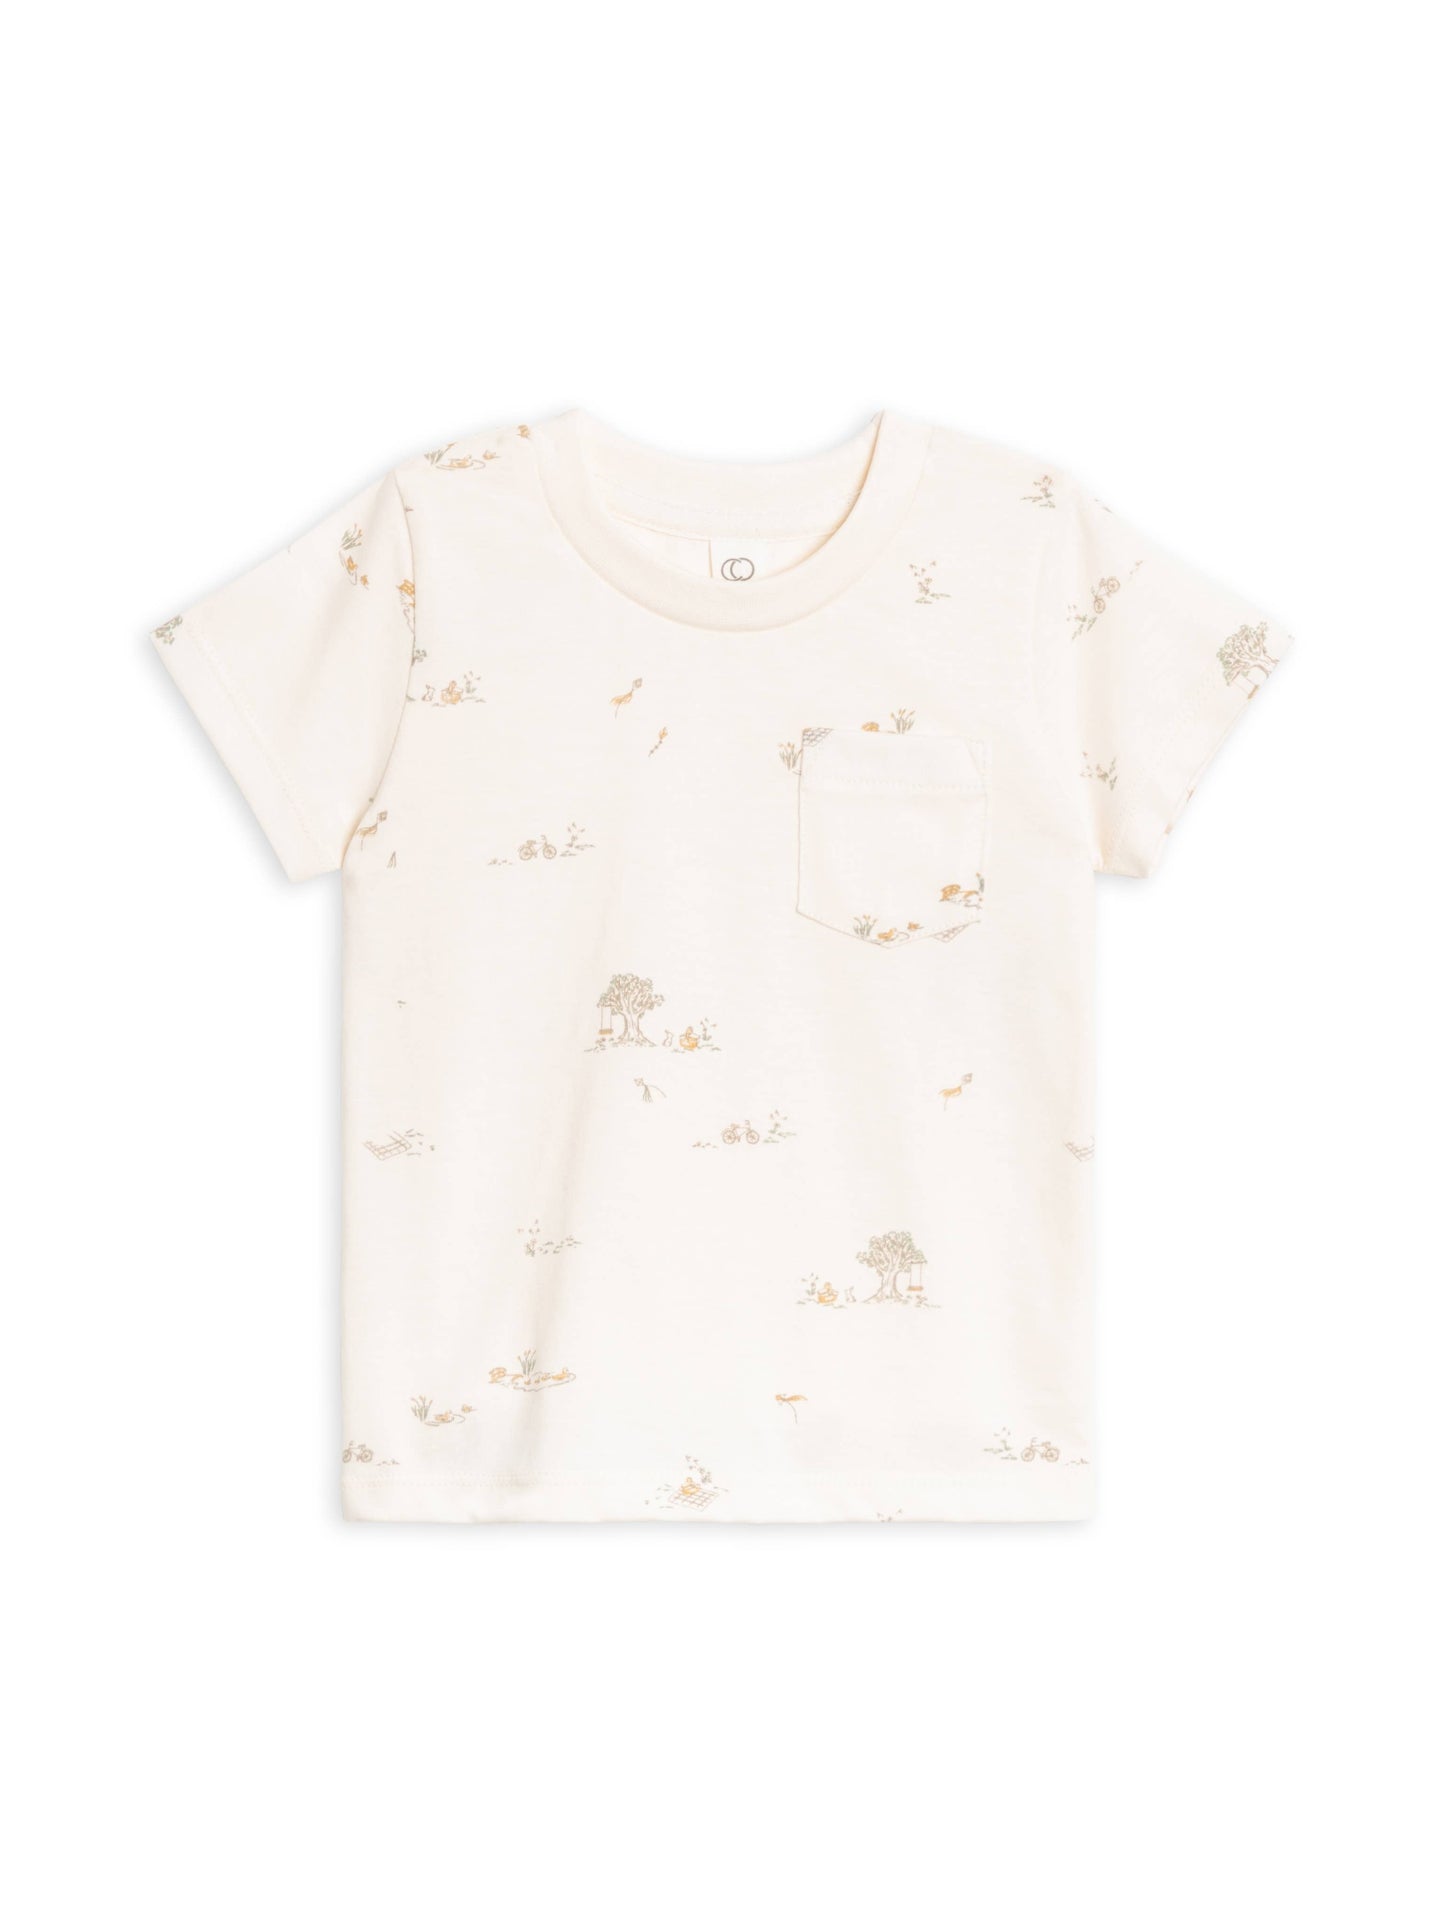 Picnic in the Park Organic Baby & Kids Everest Tee